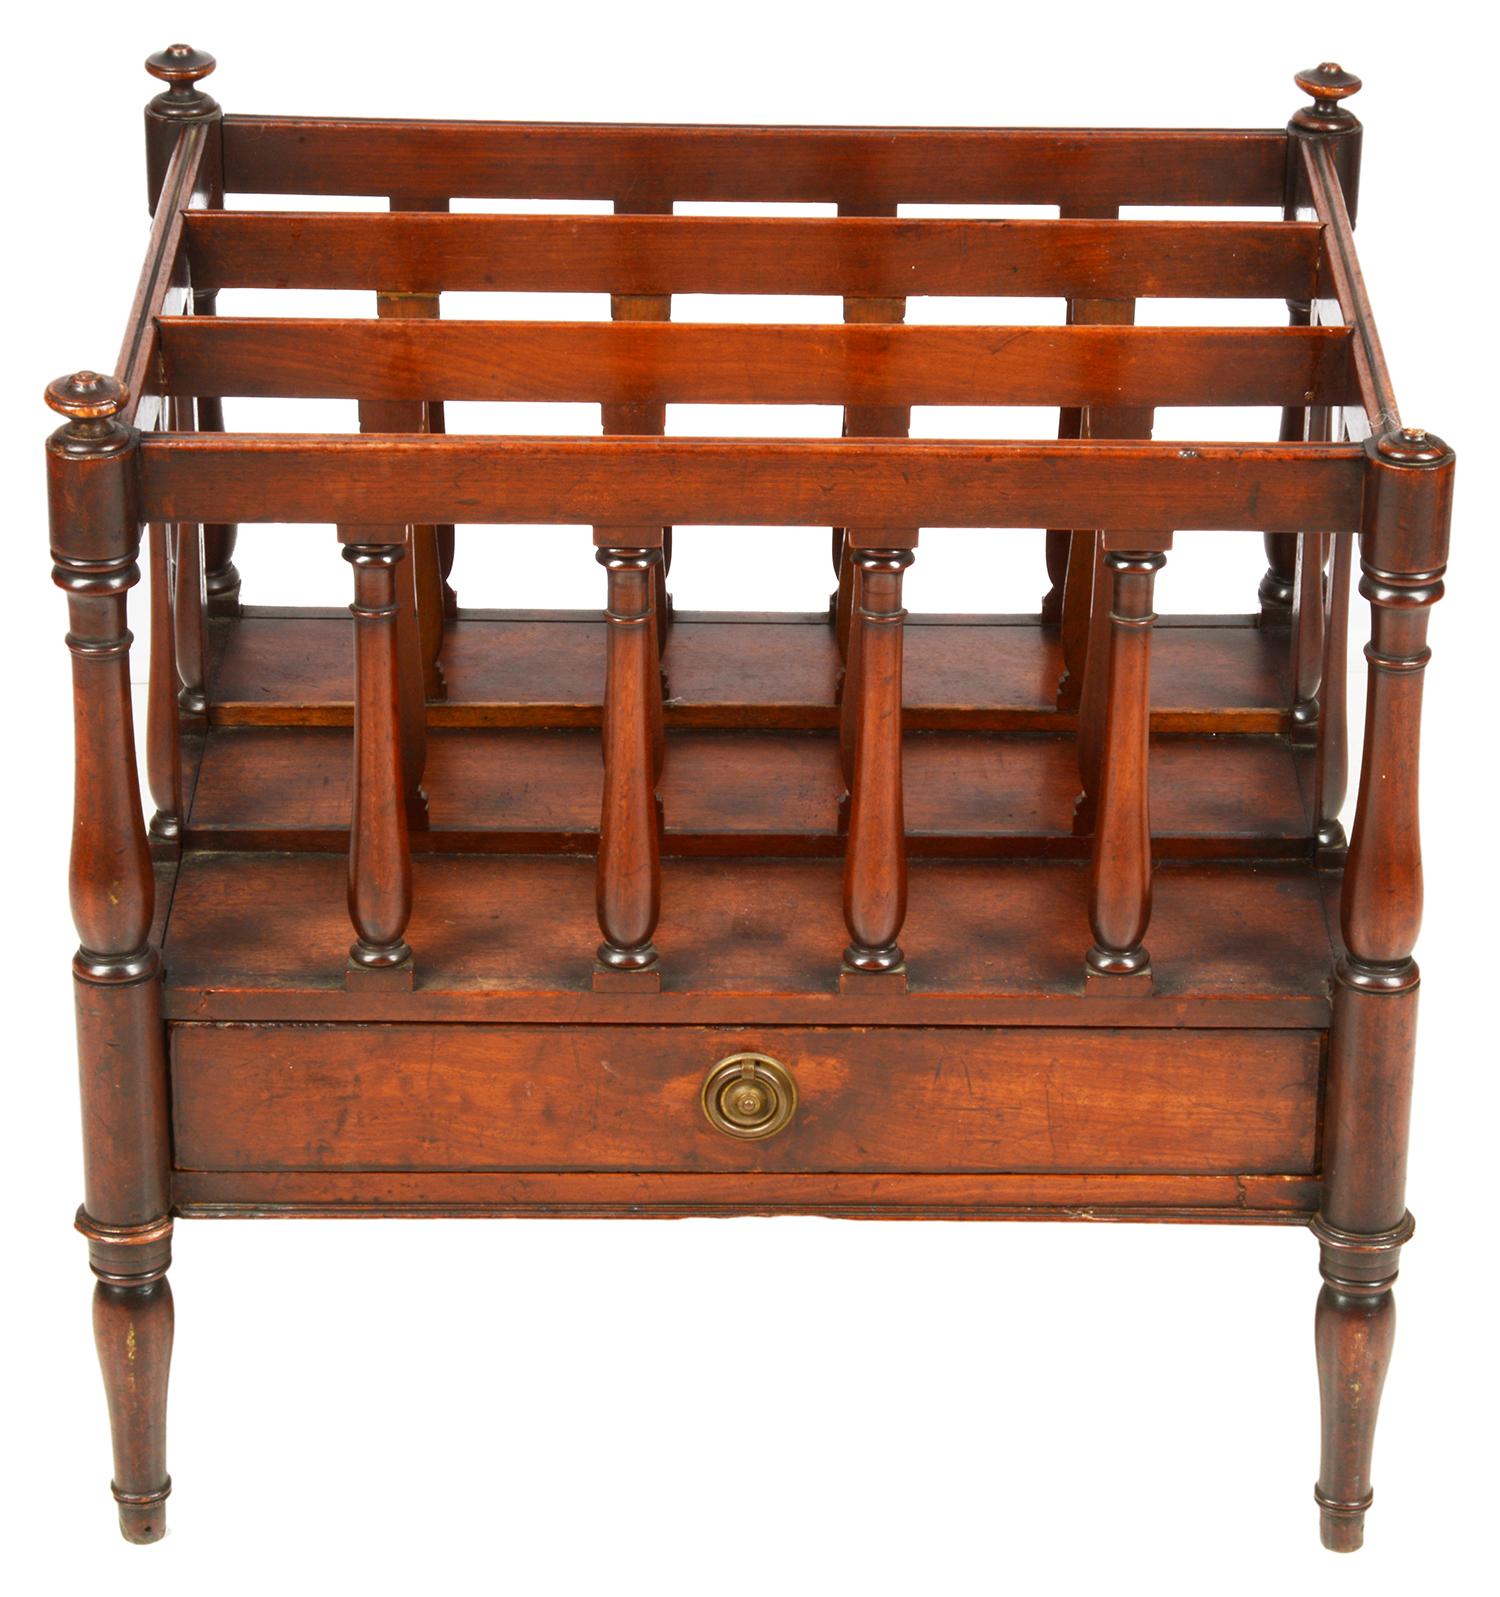 A good quality Regency period mahogany Canterbury, having three slatted divisions with ring turned supports, a single frieze oak lined drawer and raised on turned tapering legs.